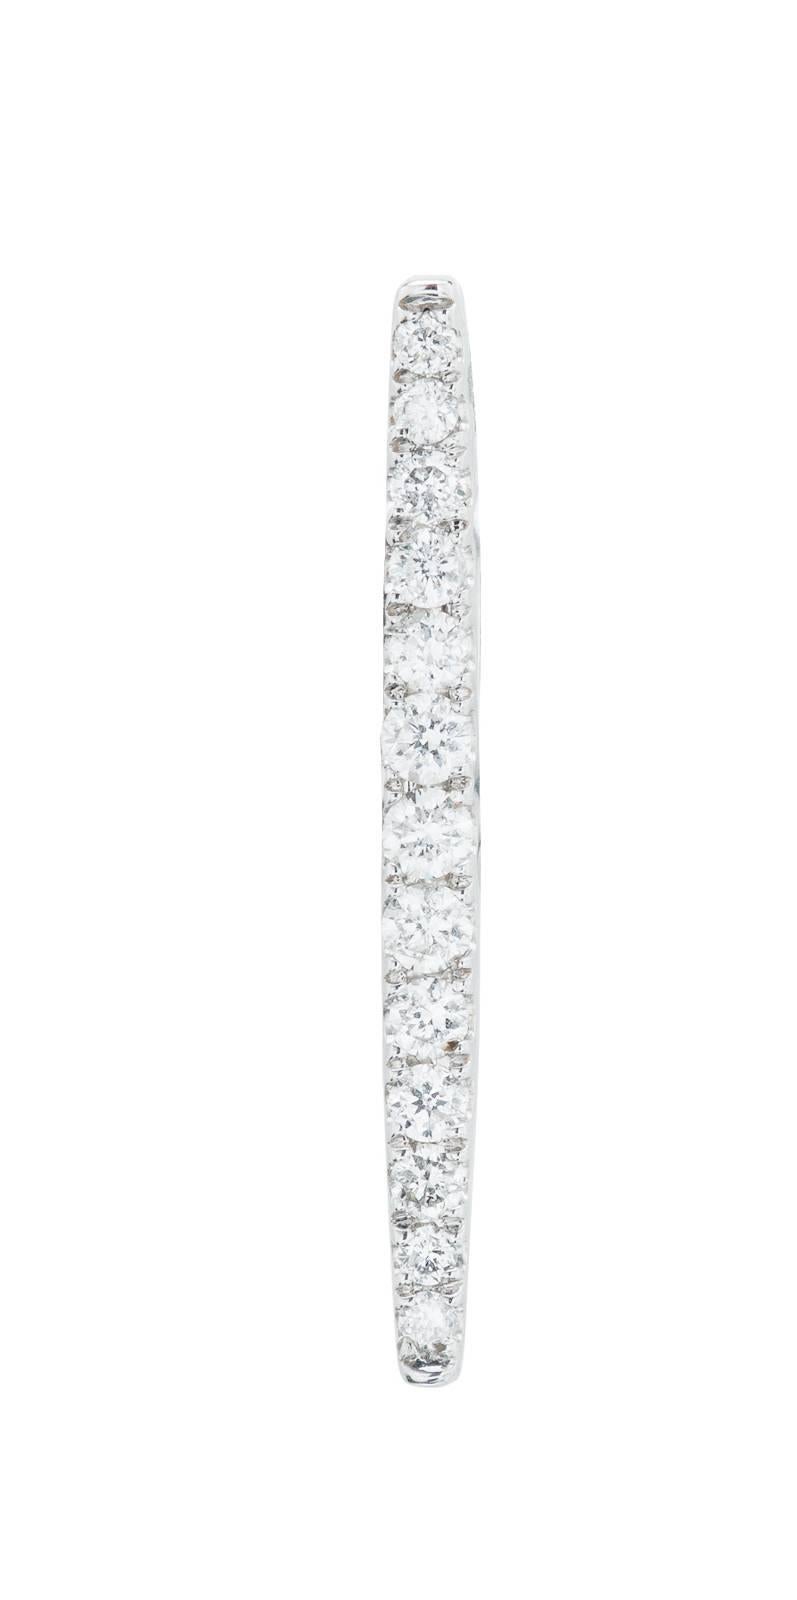 The Ear Stud ROMINA is made of 18 Karat White Gold with 13 White Diamonds 0.11 Carat.